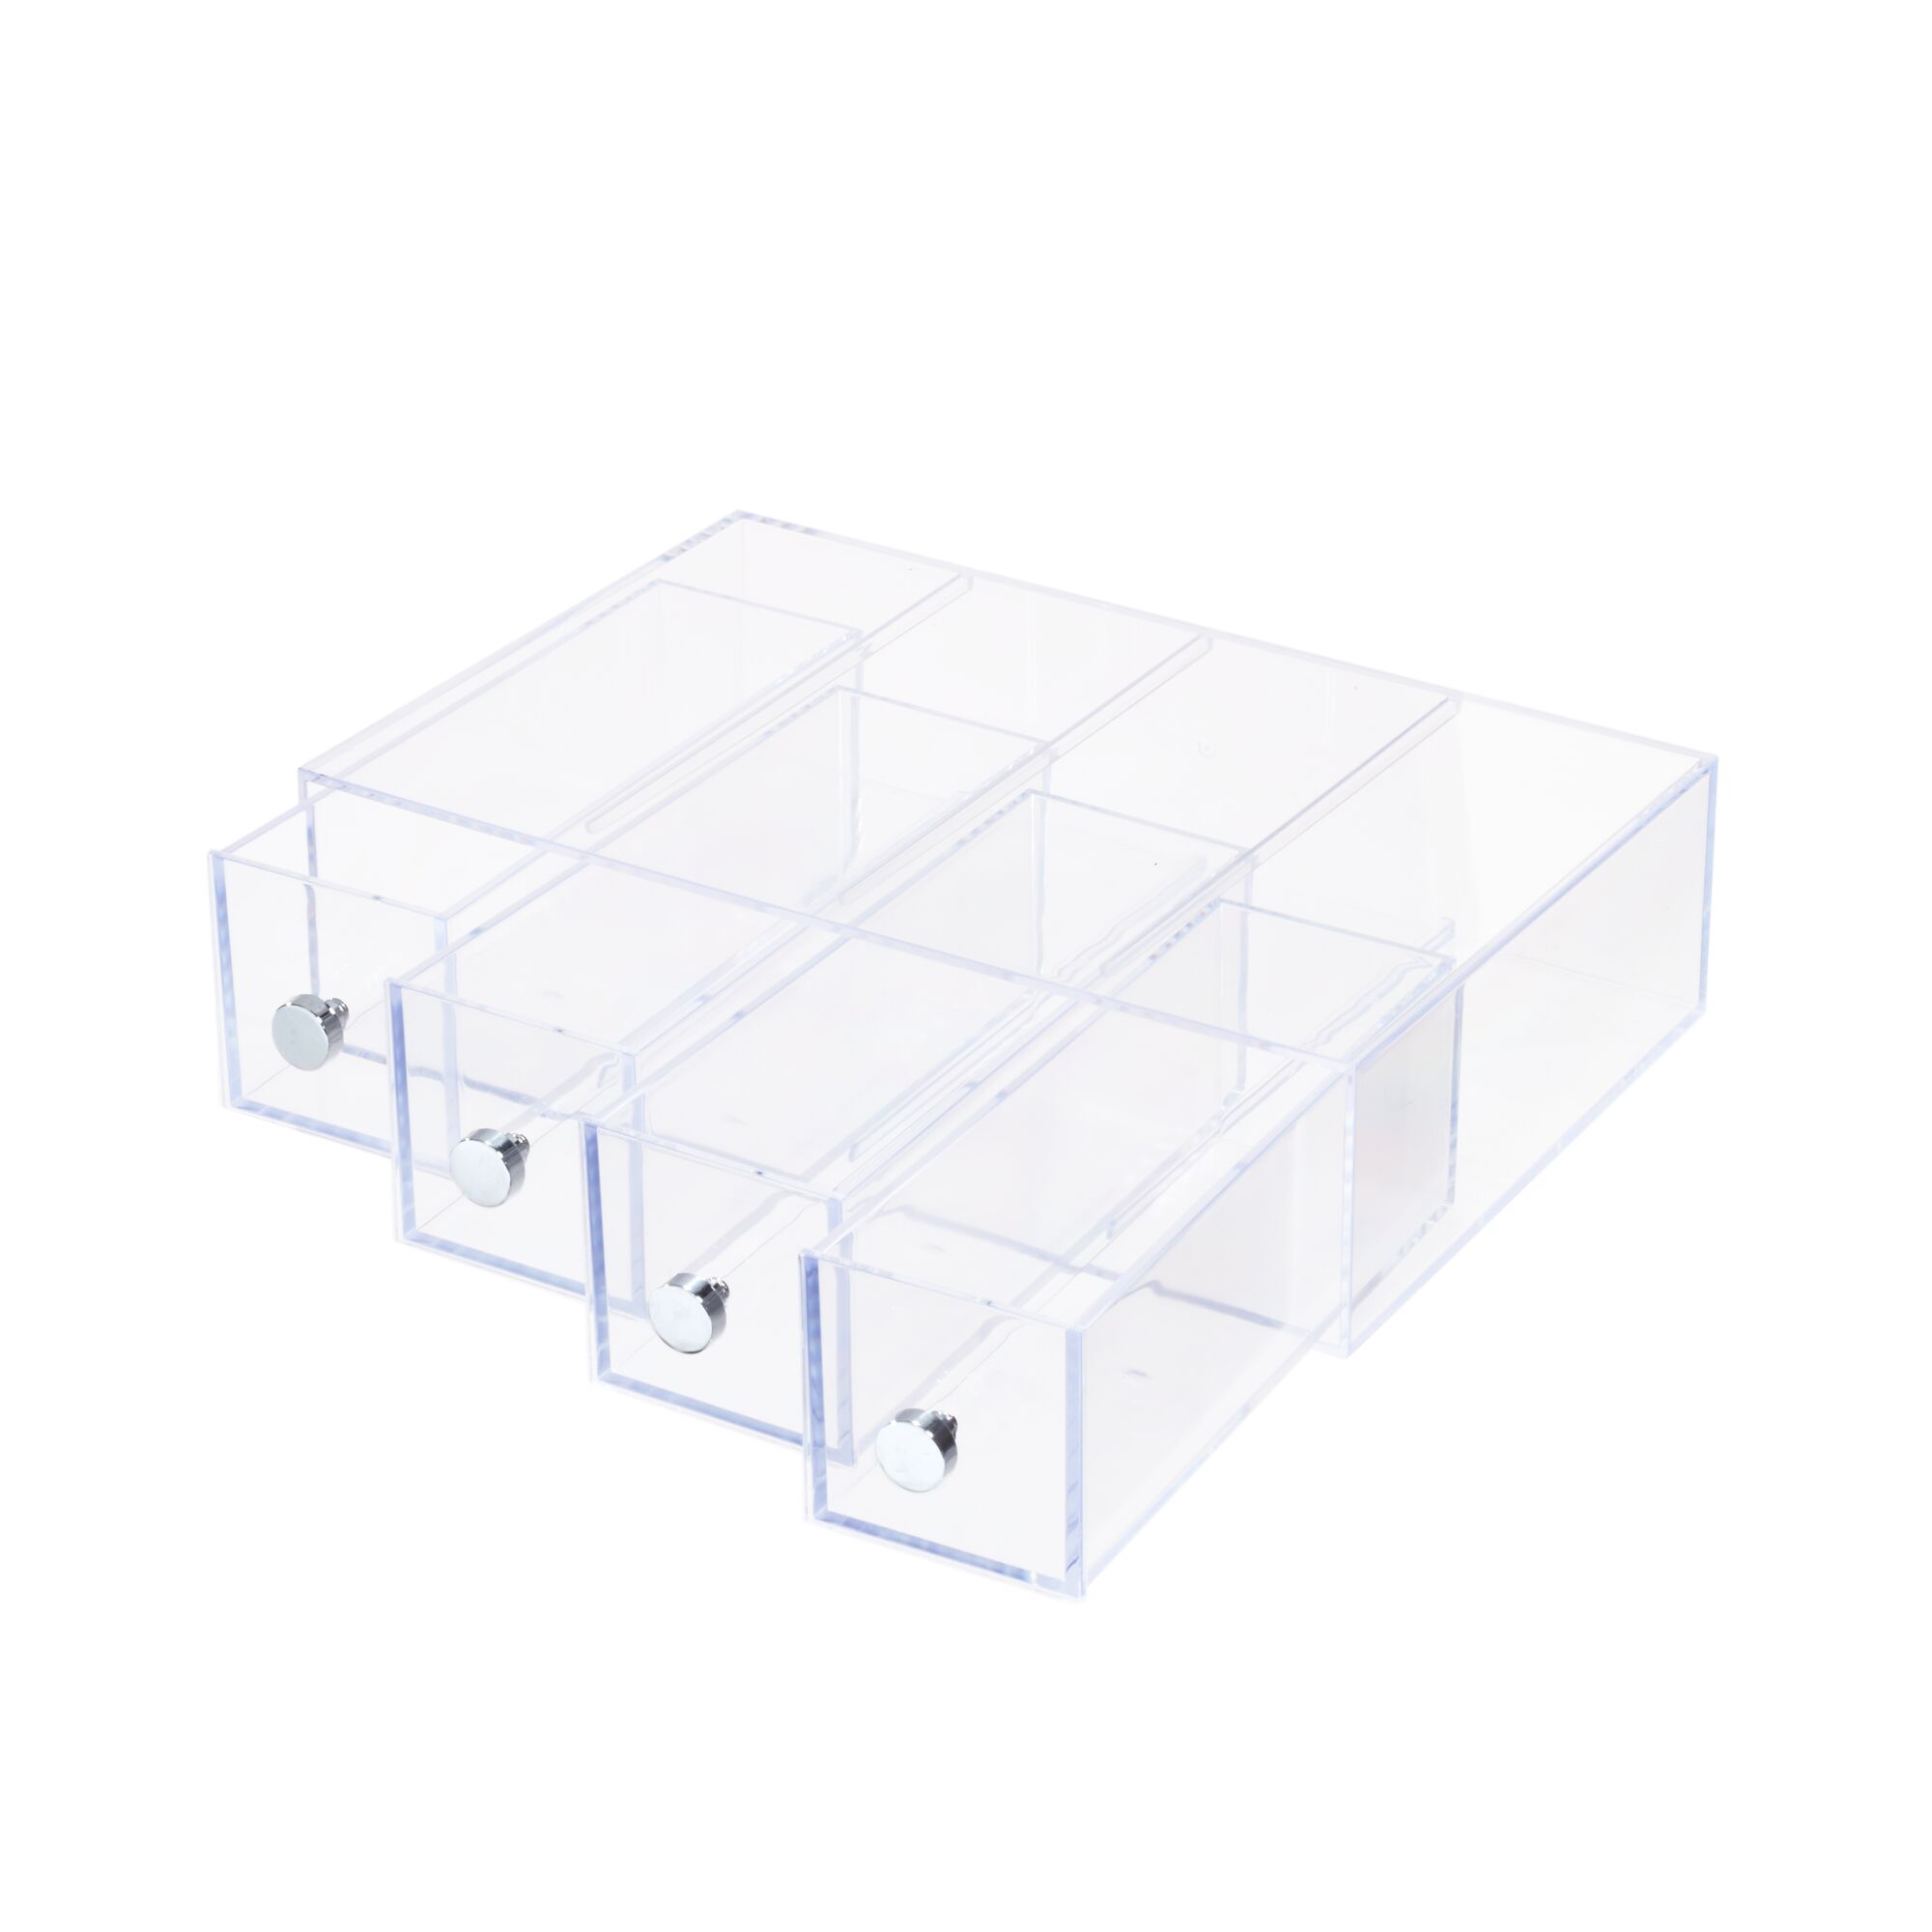 iDesign Clear Storage and Organization 4-Drawer Towers - image 5 of 8